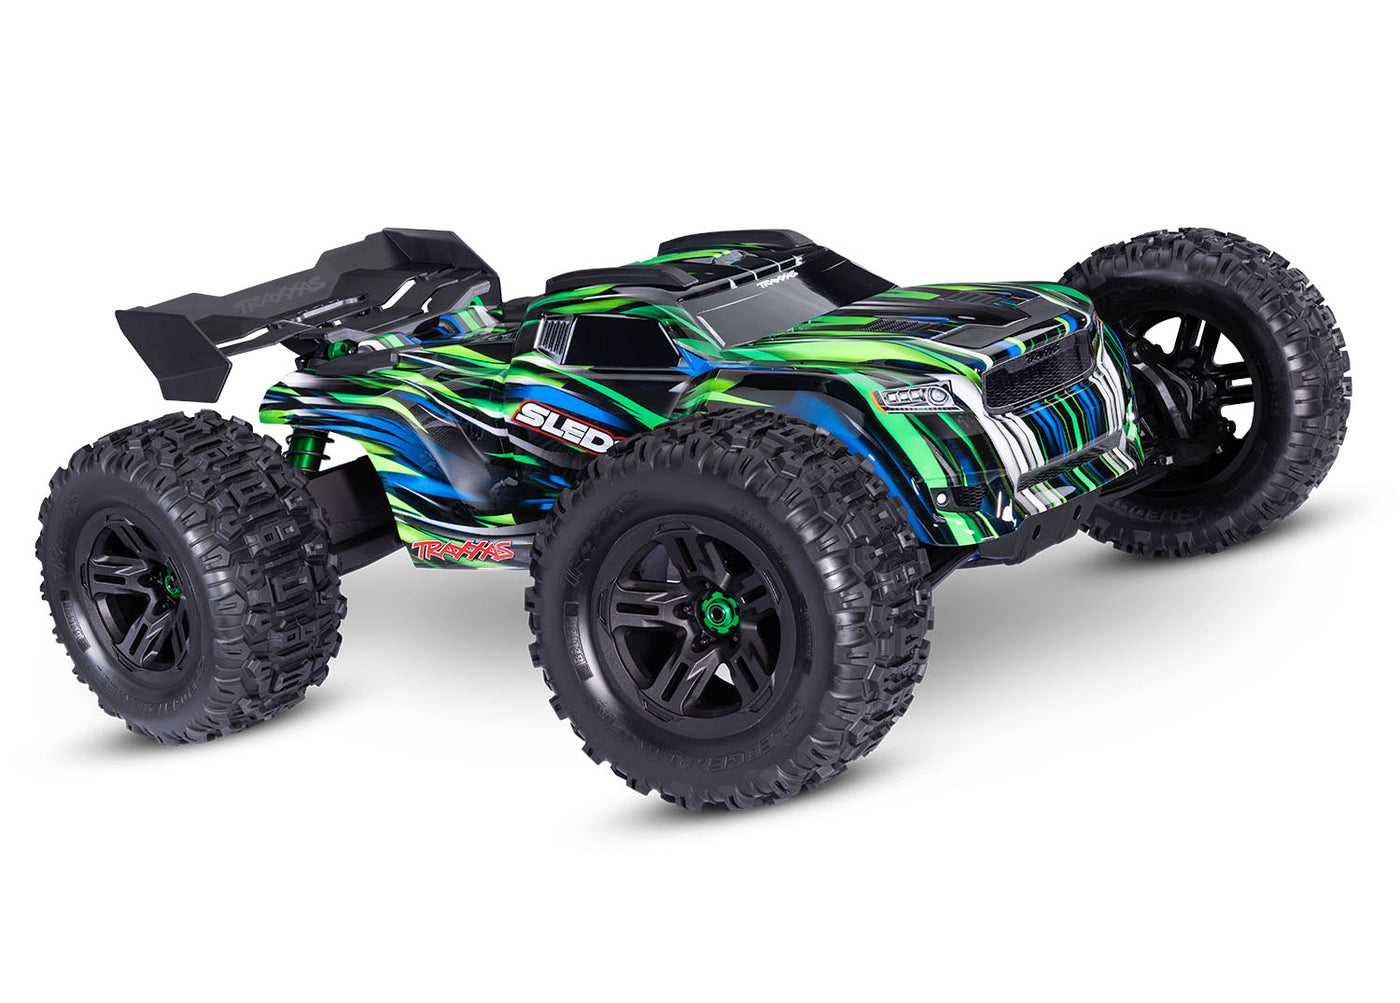 Sledge® 1/8 scale 4WD brushless monster truck with belted tires. Traxxas #95096-4